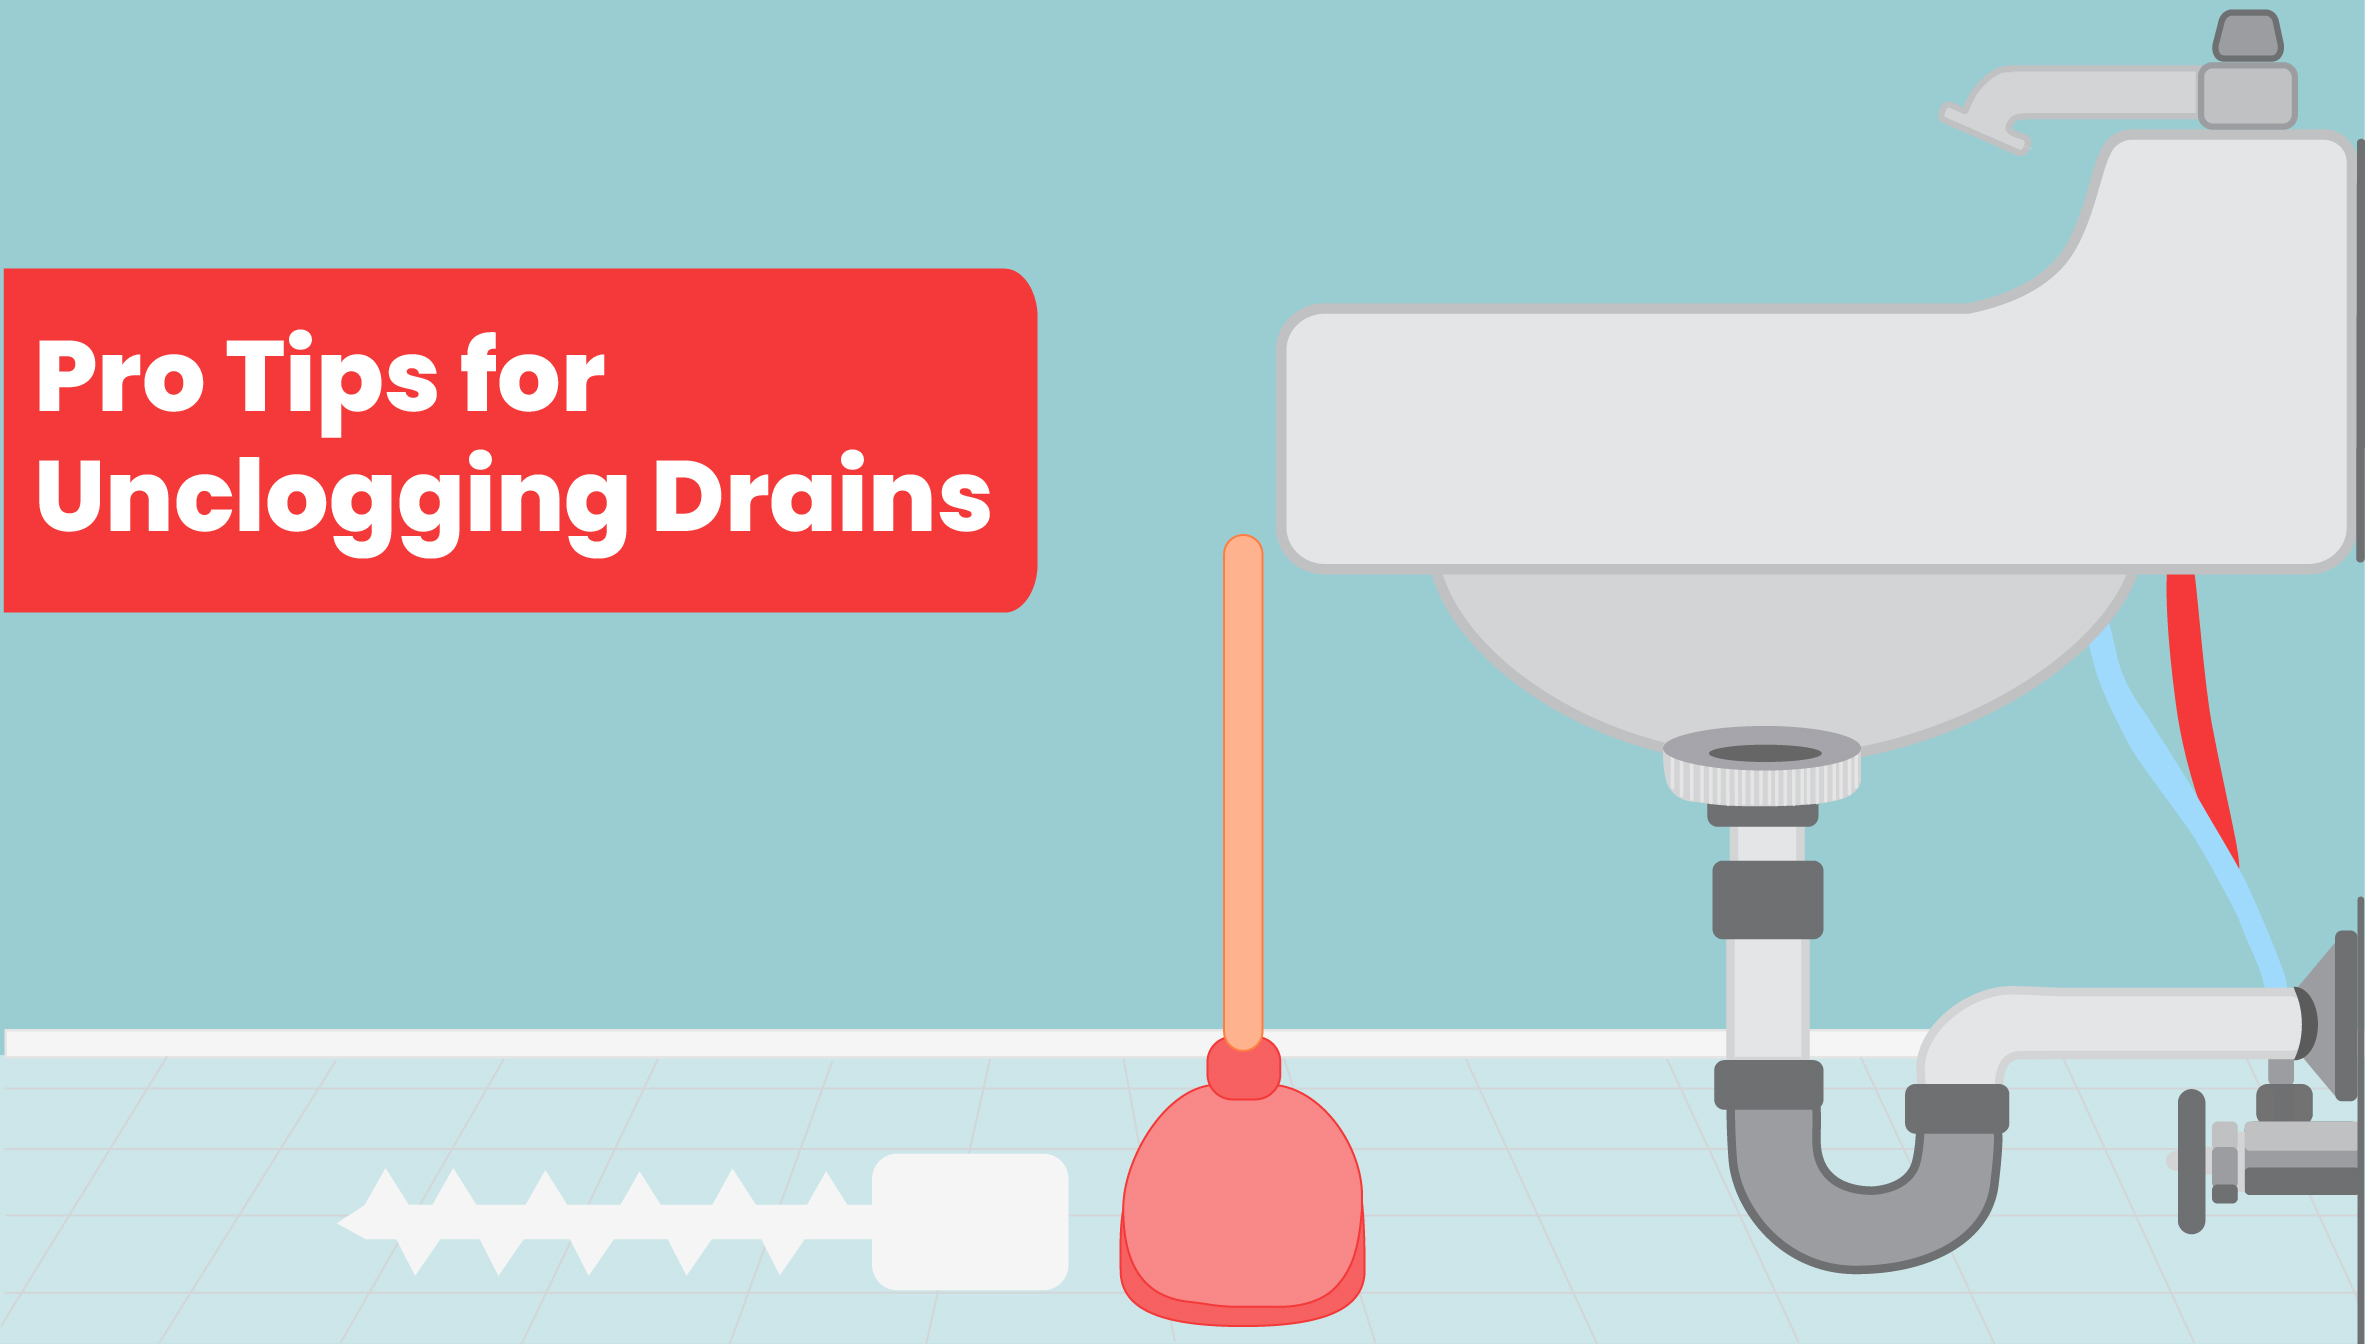 How To Unclog A Grease Clogged Drain: Expert Tips